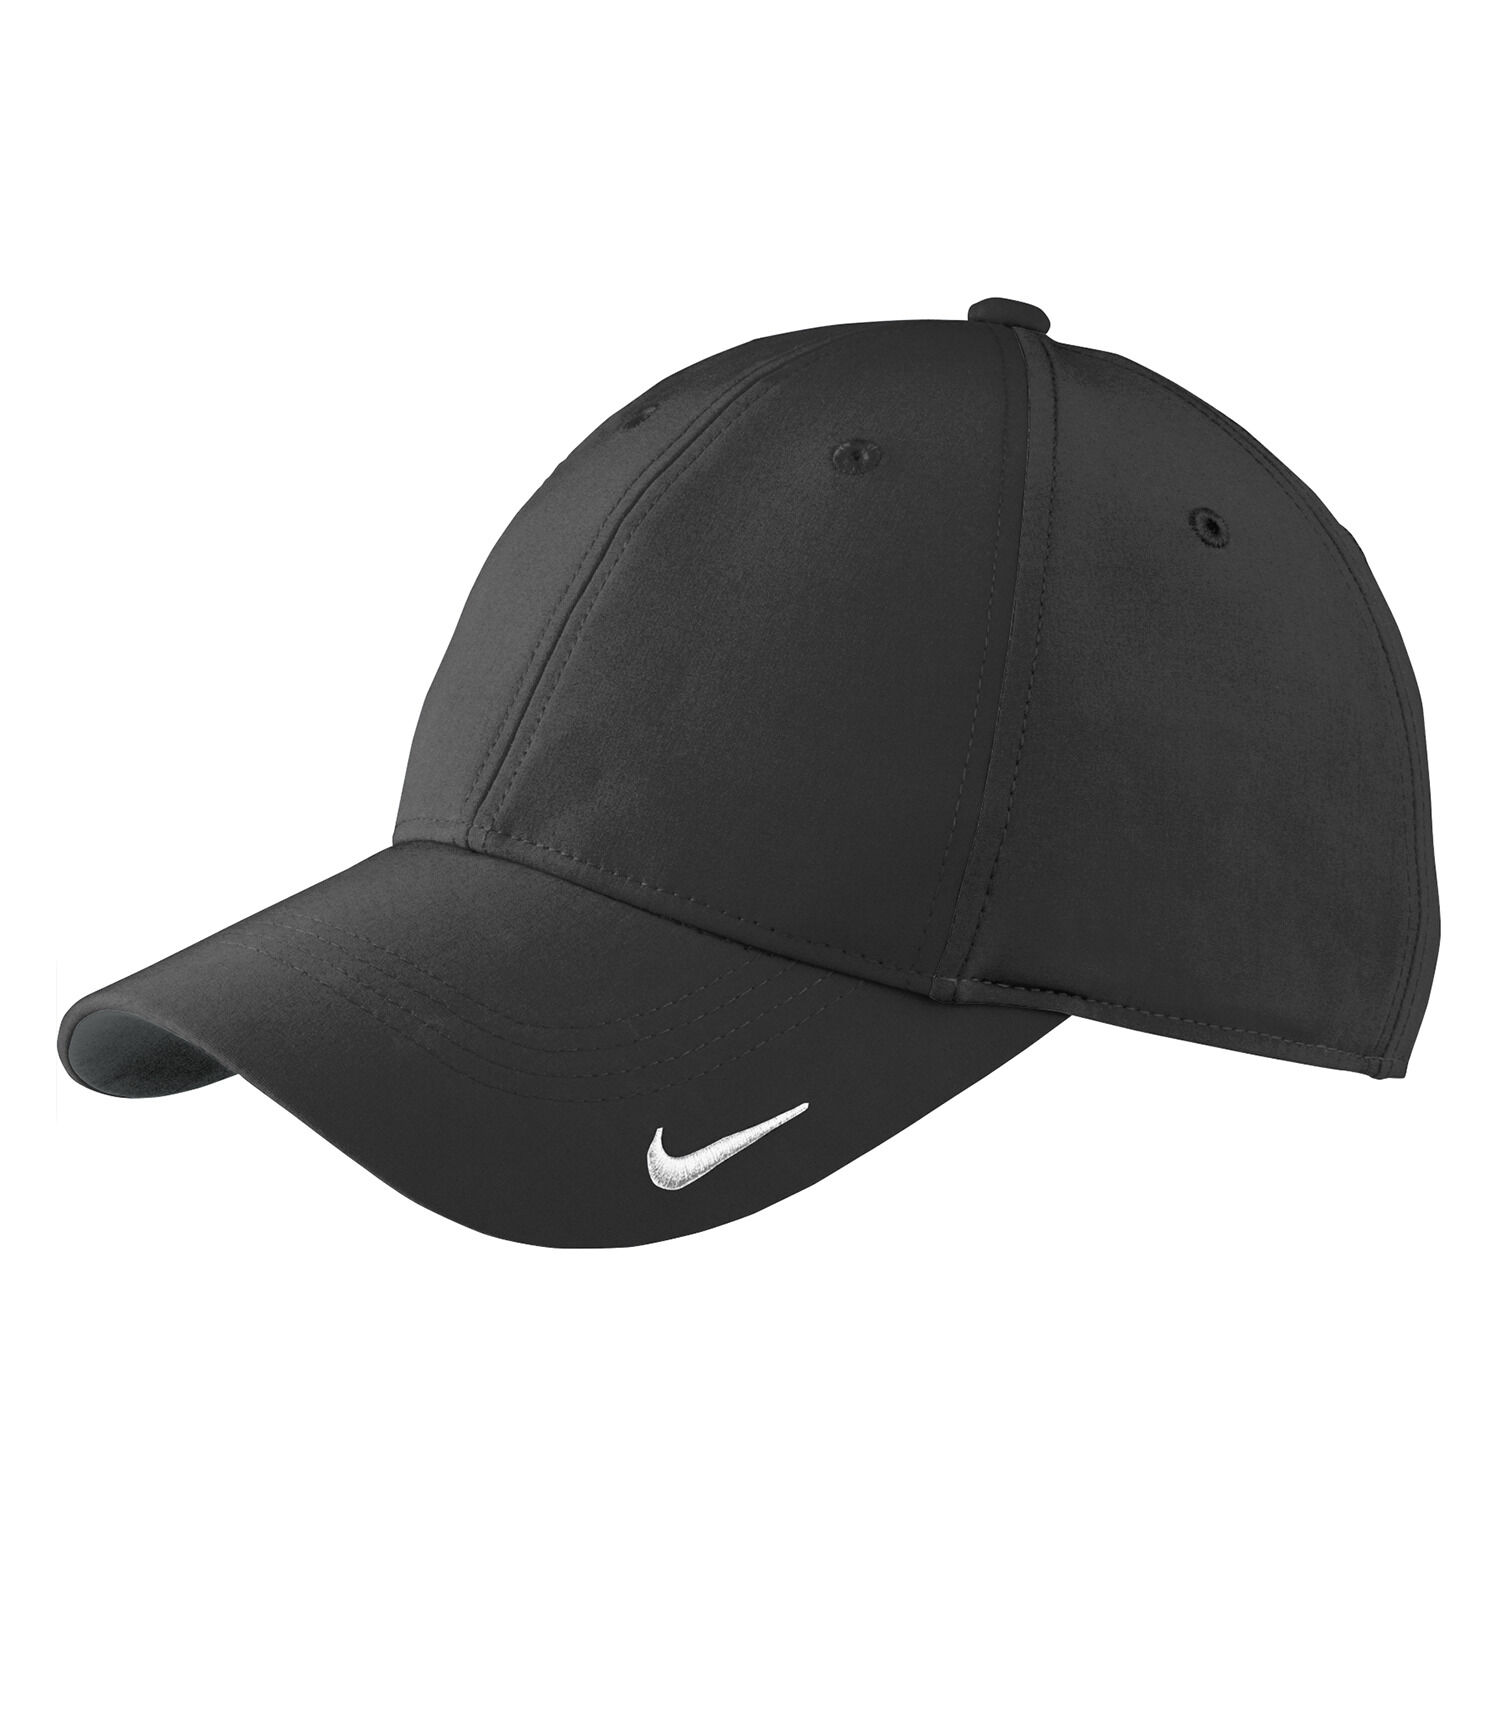 Apparel - Clothing, Headwear & Accessories - Hats and Caps - Unique ...